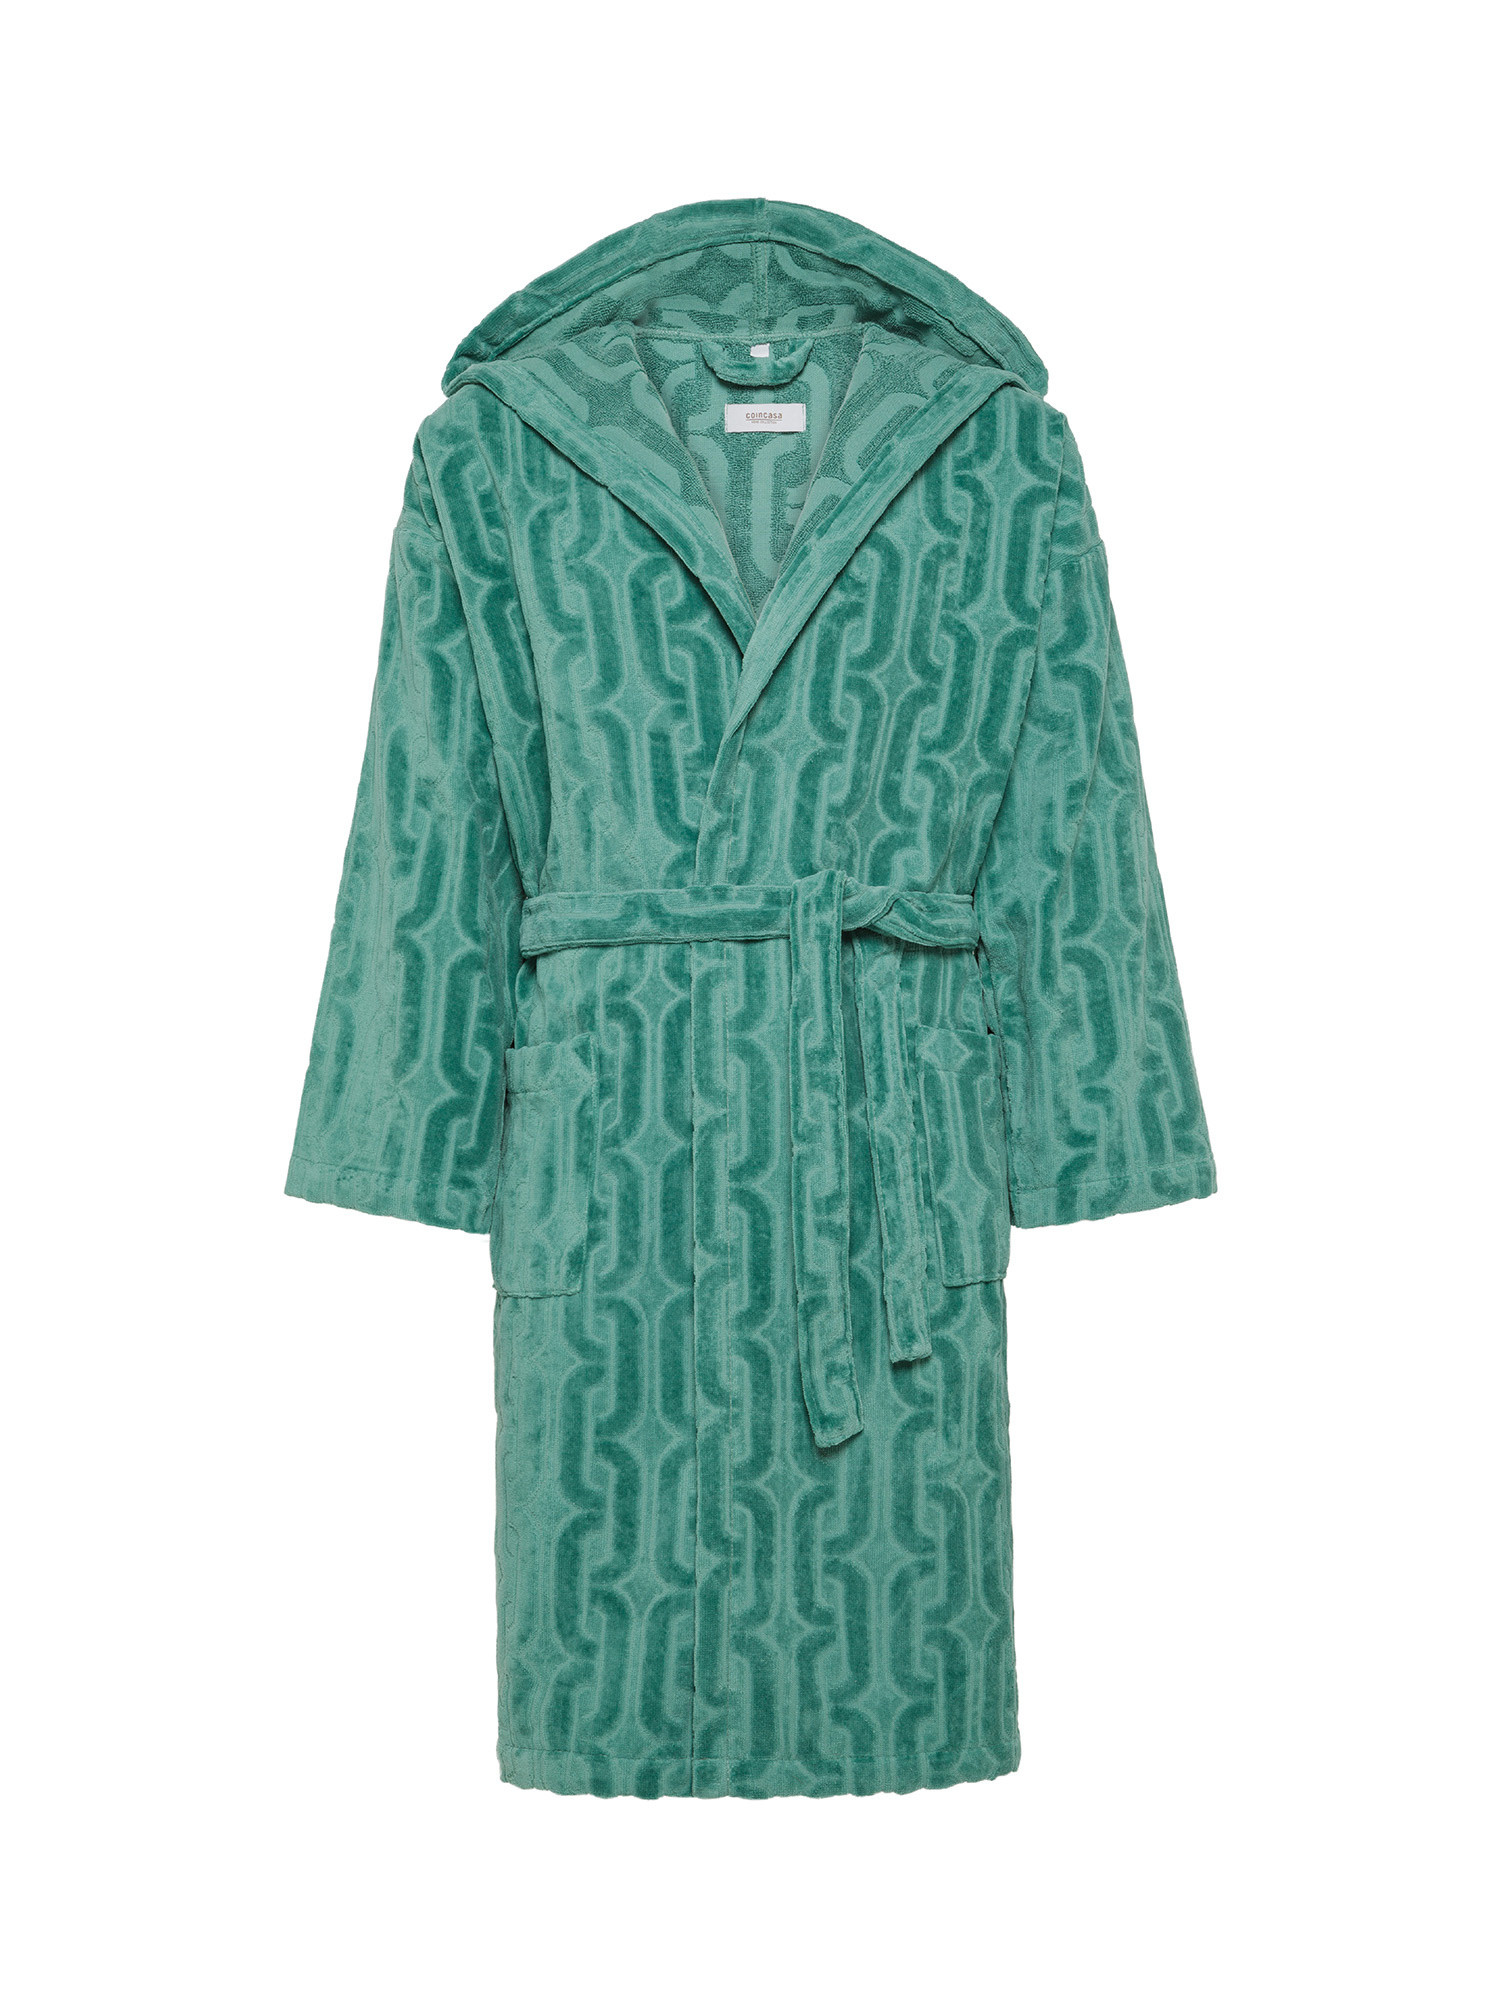 Cotton velour bathrobe with geometric relief pattern, Green, large image number 0